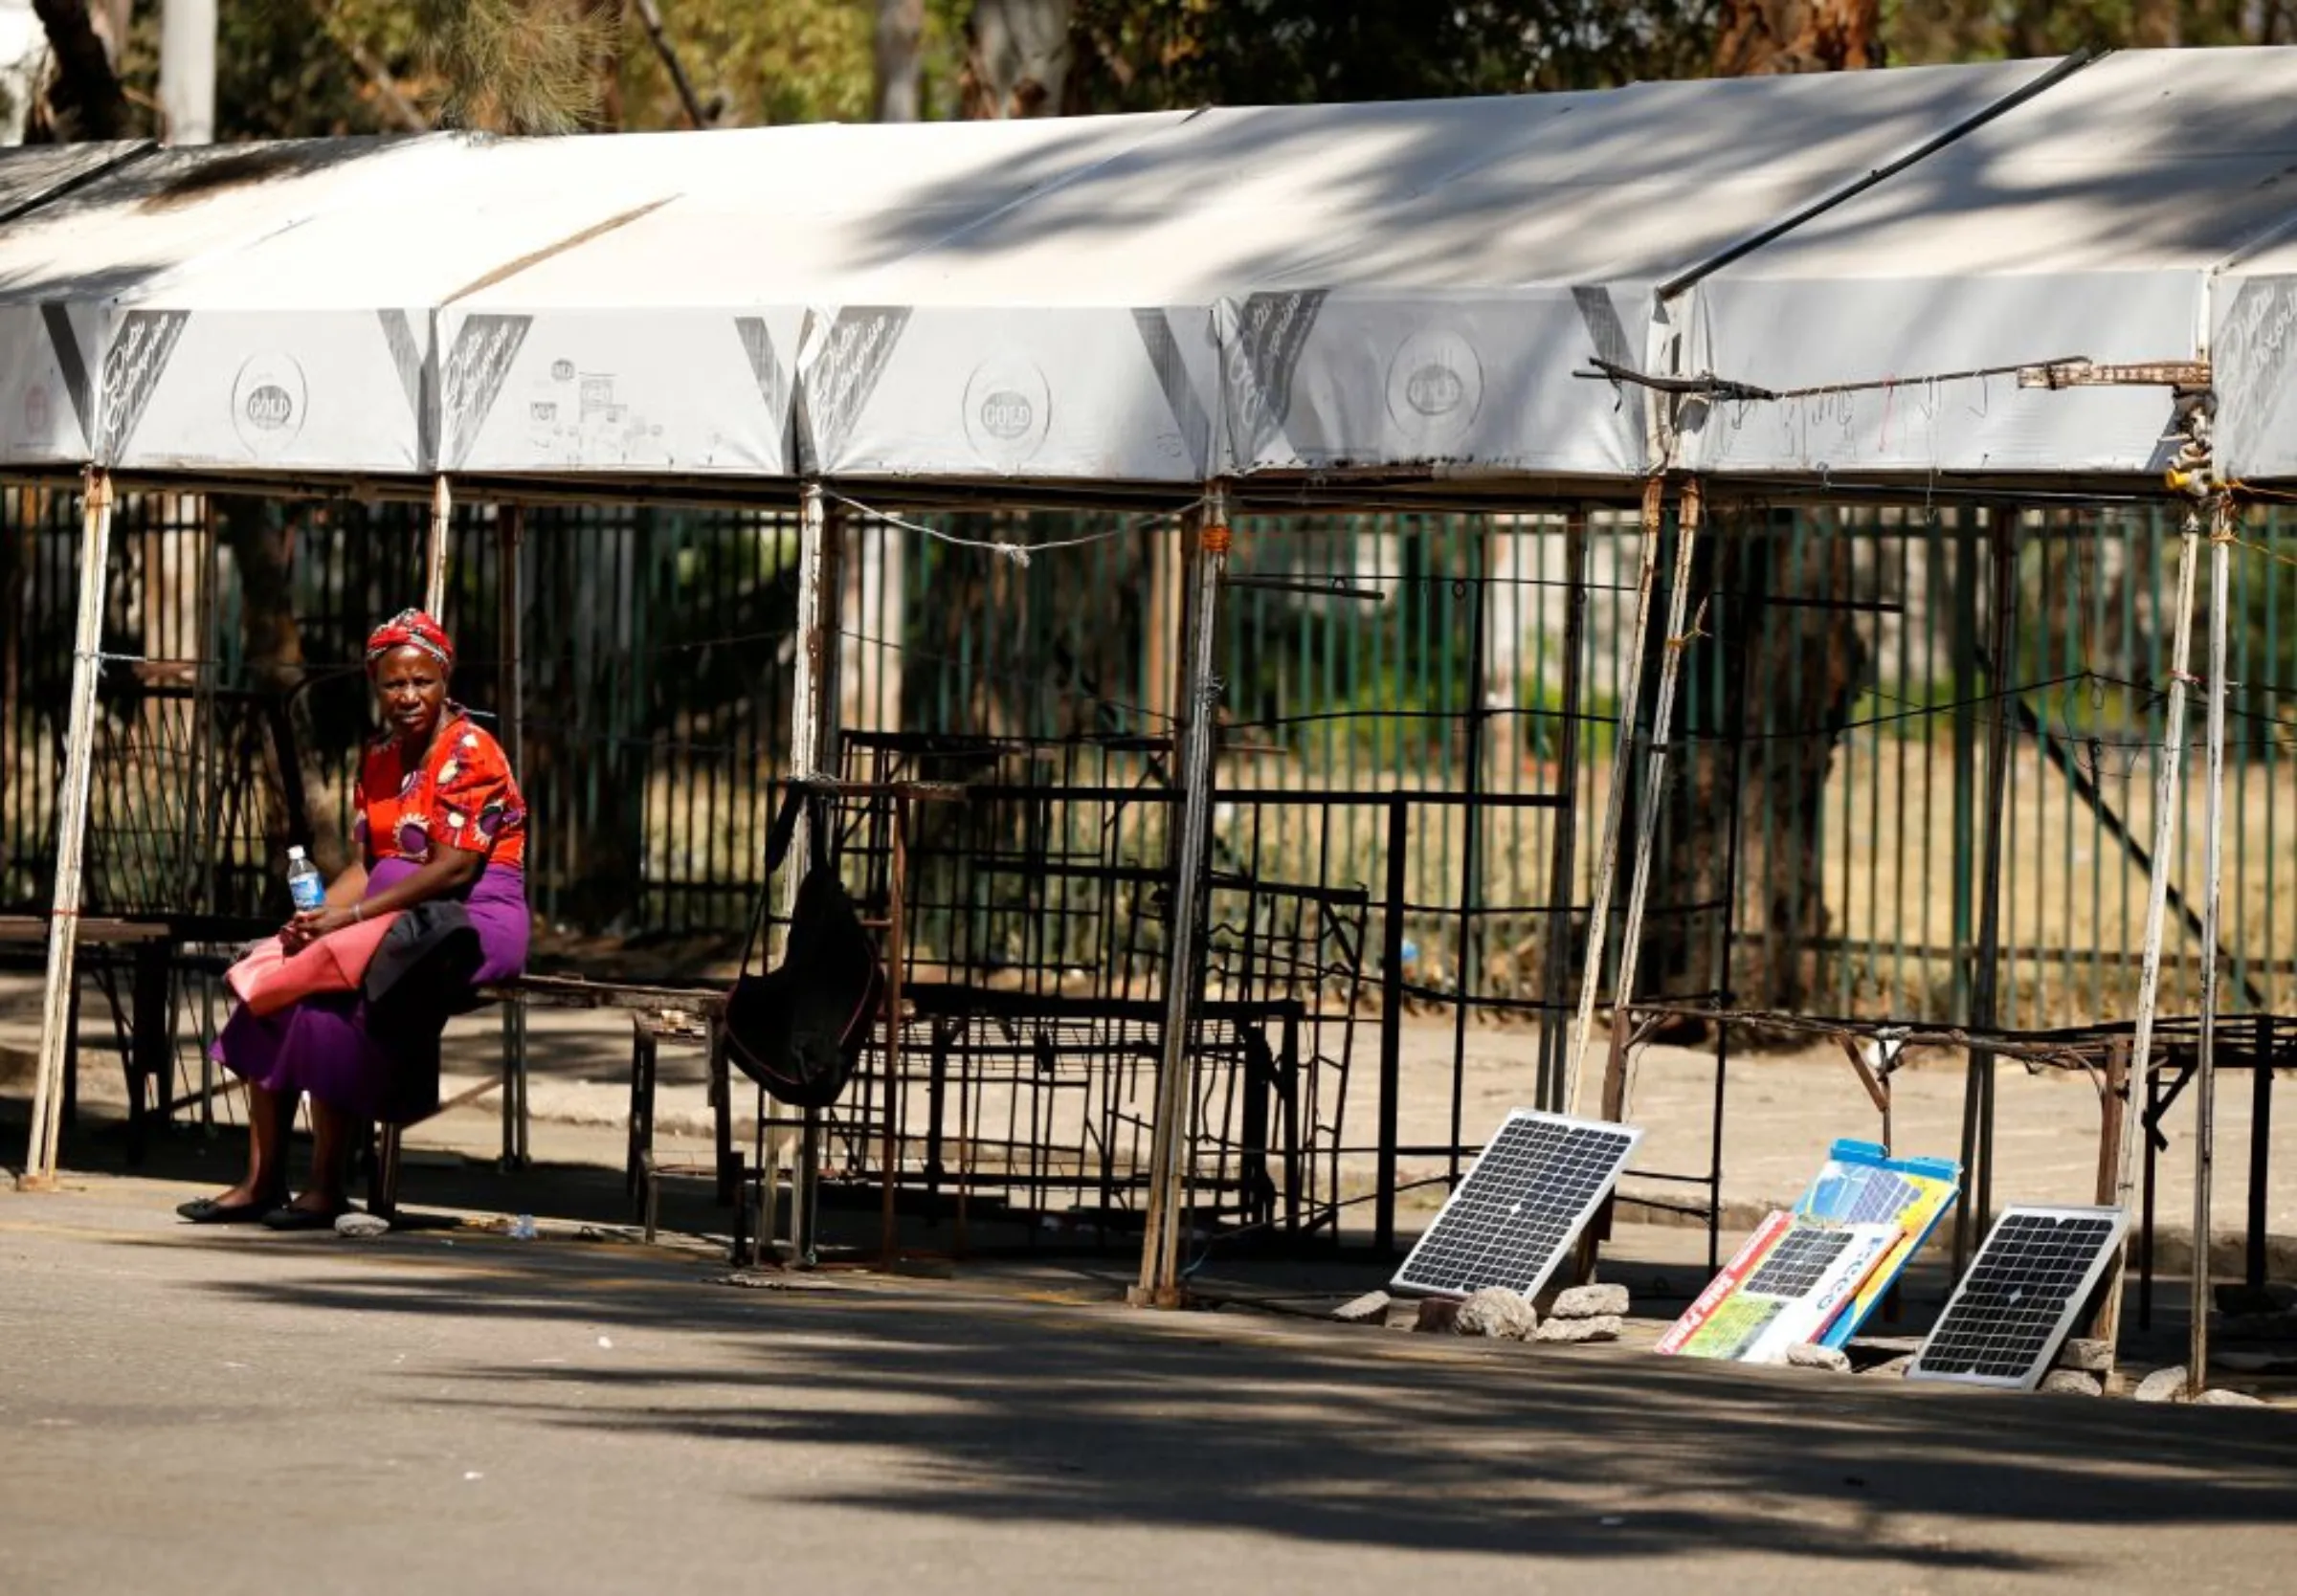 A solar panel vendor waits for clients at a market, after Zimbabwe police banned an anti-government demonstration in Bulawayo, Zimbabwe, August 19, 2019